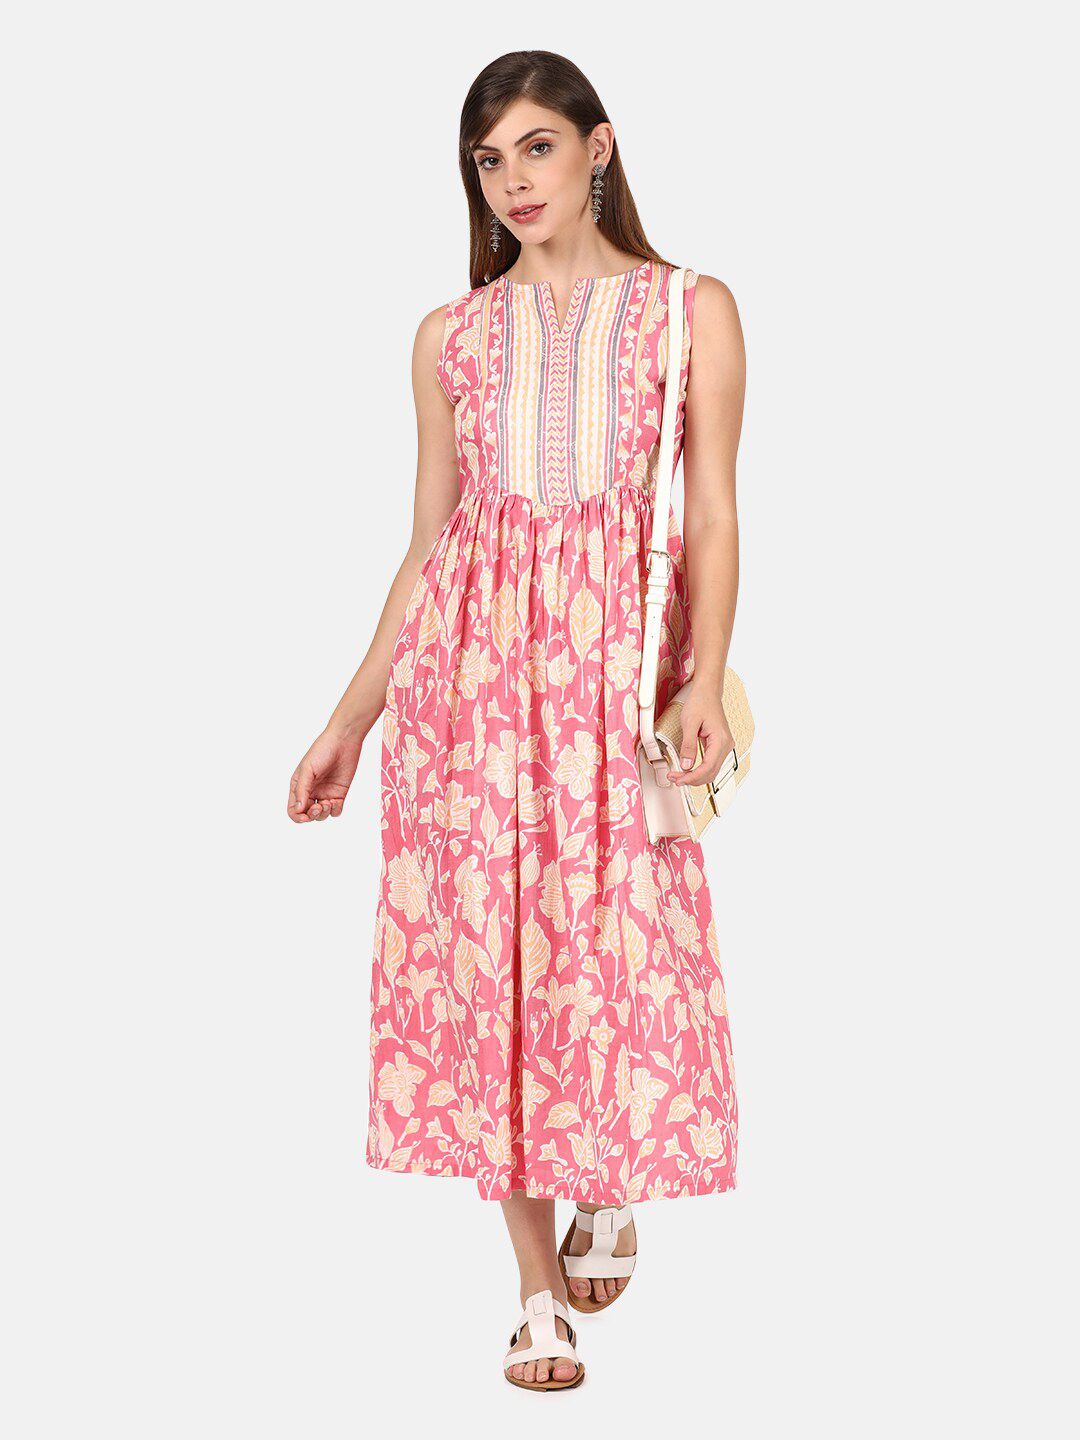 UNTUNG Peach-Coloured Floral Printed A-Line Midi Dress Price in India